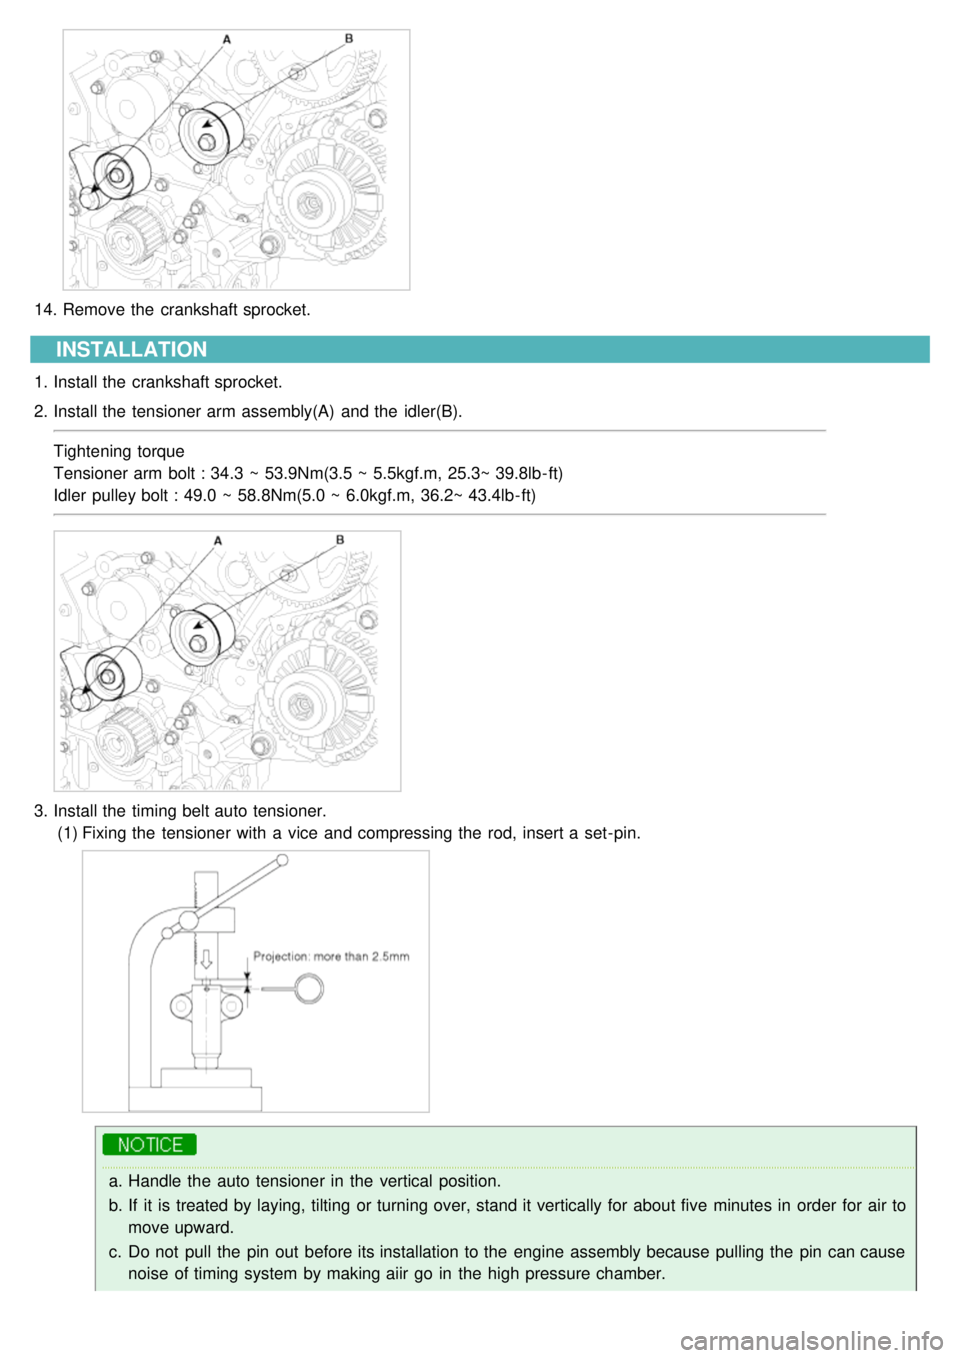 KIA CARNIVAL 2007 Owners Manual 14.Remove the  crankshaft sprocket.
INSTALLATION
1.Install the  crankshaft sprocket.
2. Install the  tensioner arm assembly(A)  and the  idler(B).
Tightening torque
Tensioner arm bolt : 34.3  ~ 53.9Nm